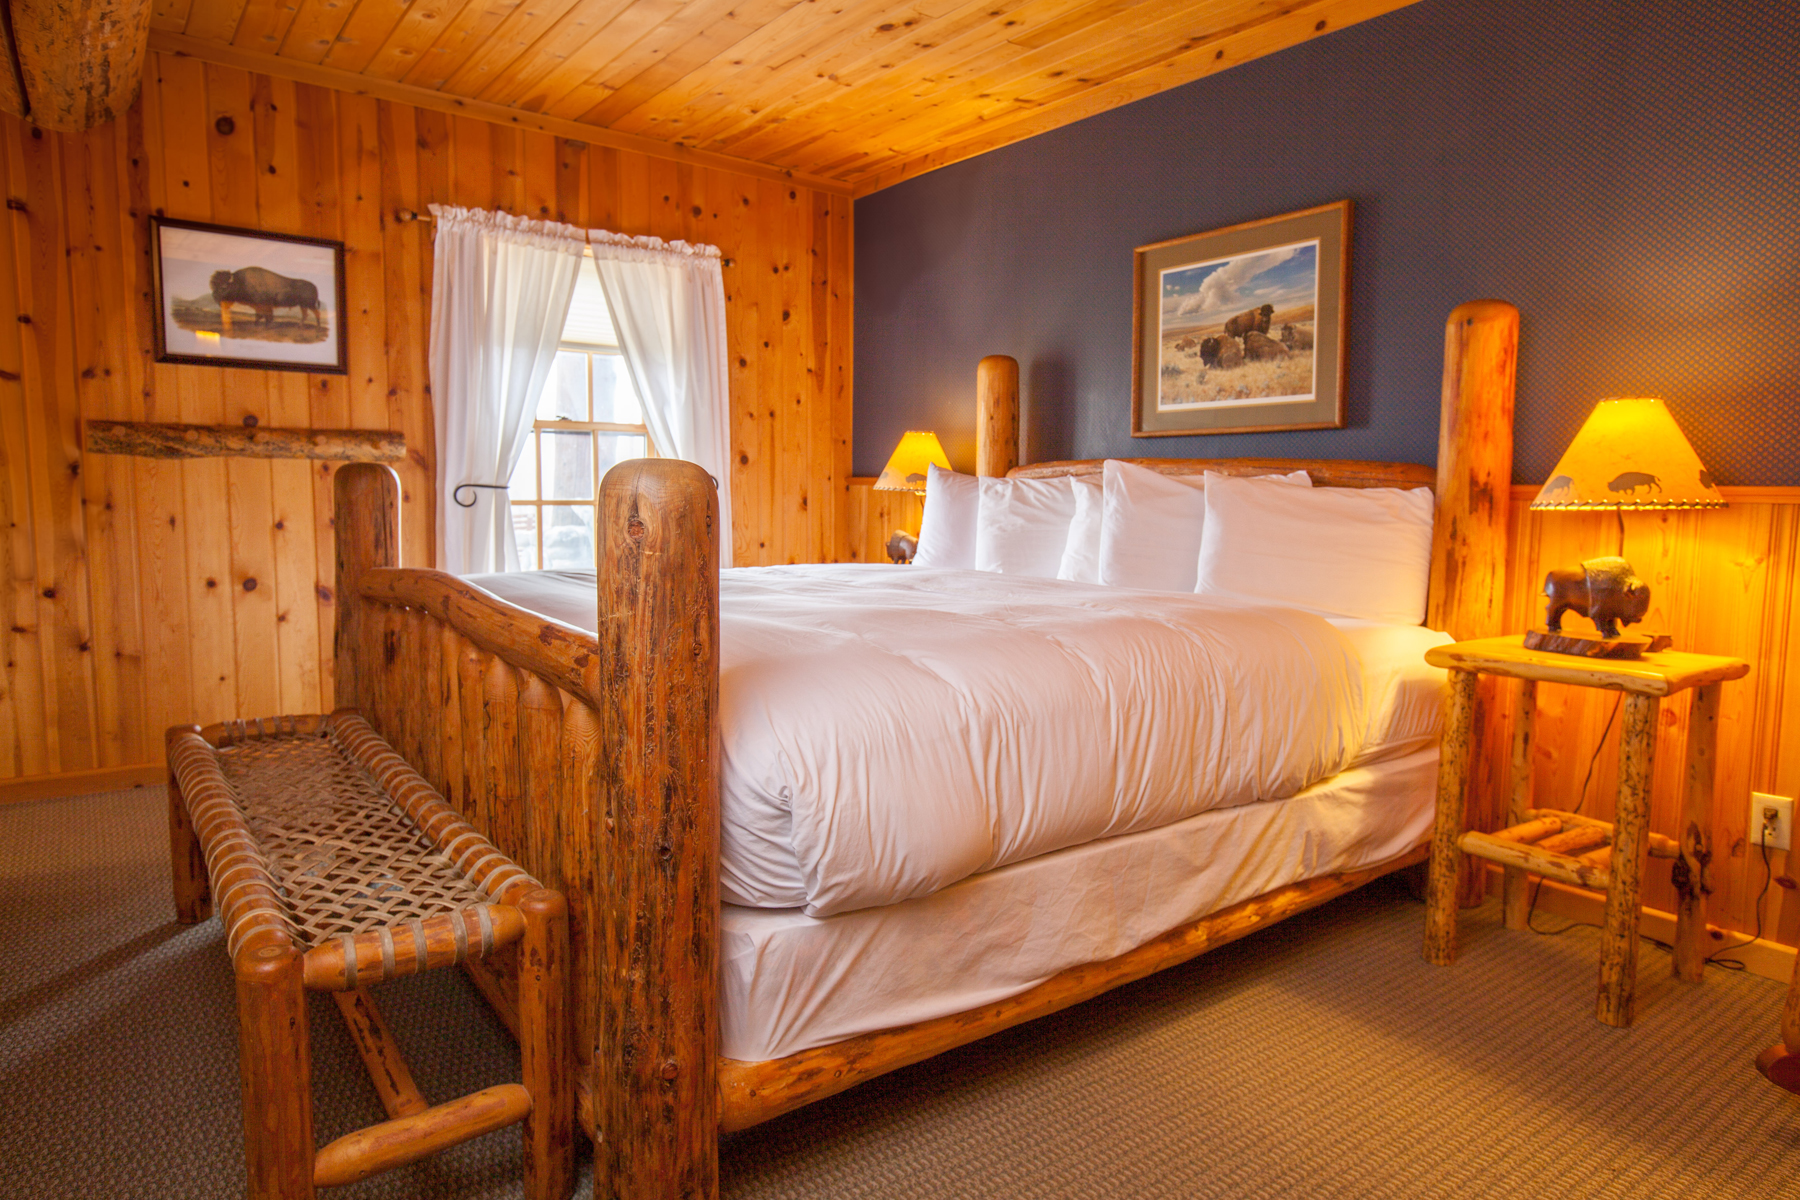 After a long day outside in the snow, Brooks Lake Lodge guests sleep soundly in plush bedding and quiet amenity-filled suites and cabins.